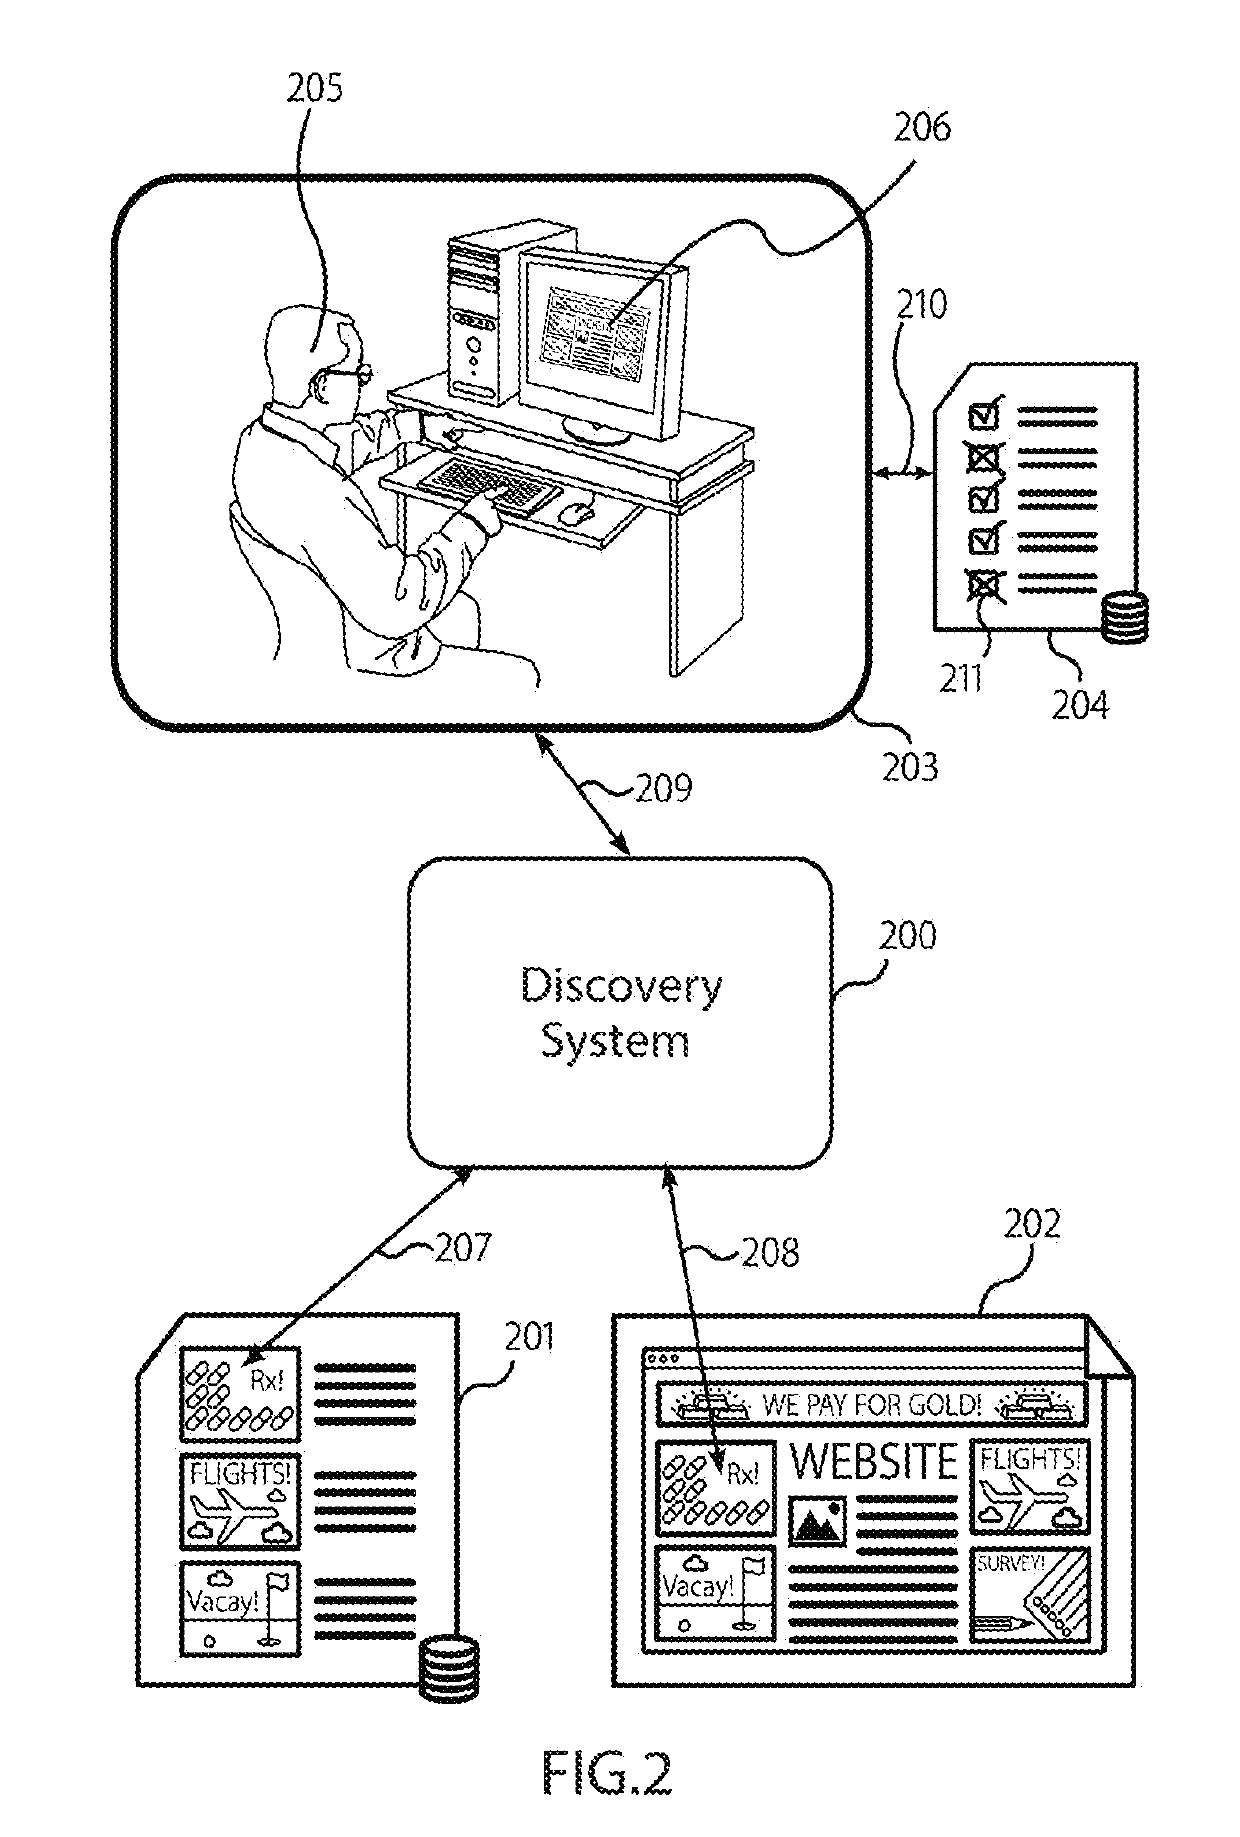 Detection system for identifying abuse and fraud using artificial intelligence across a peer-to-peer distributed content or payment networks